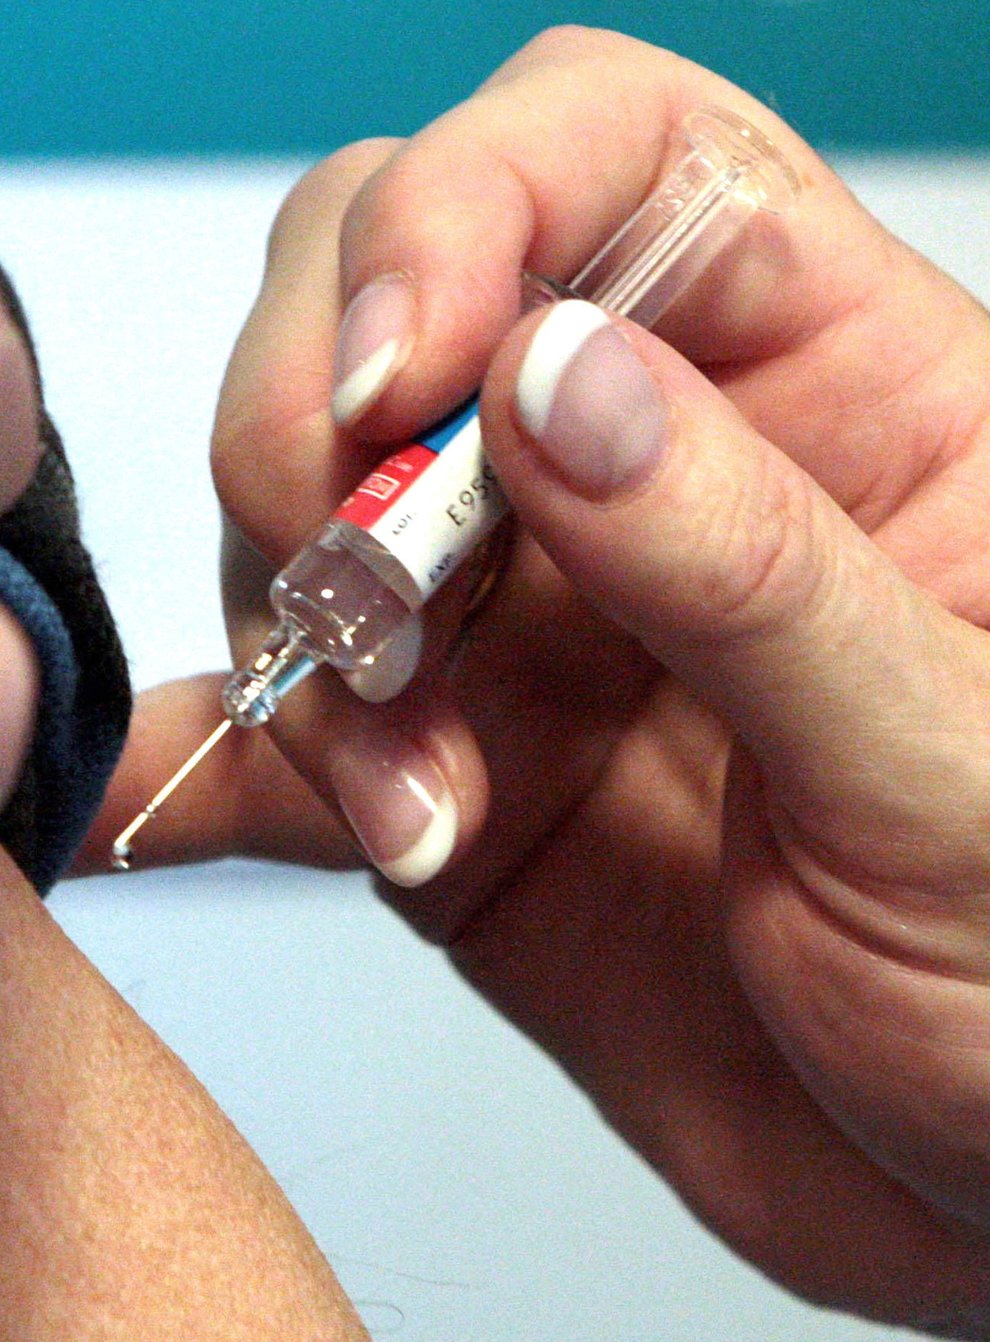 A person receiving a vaccination